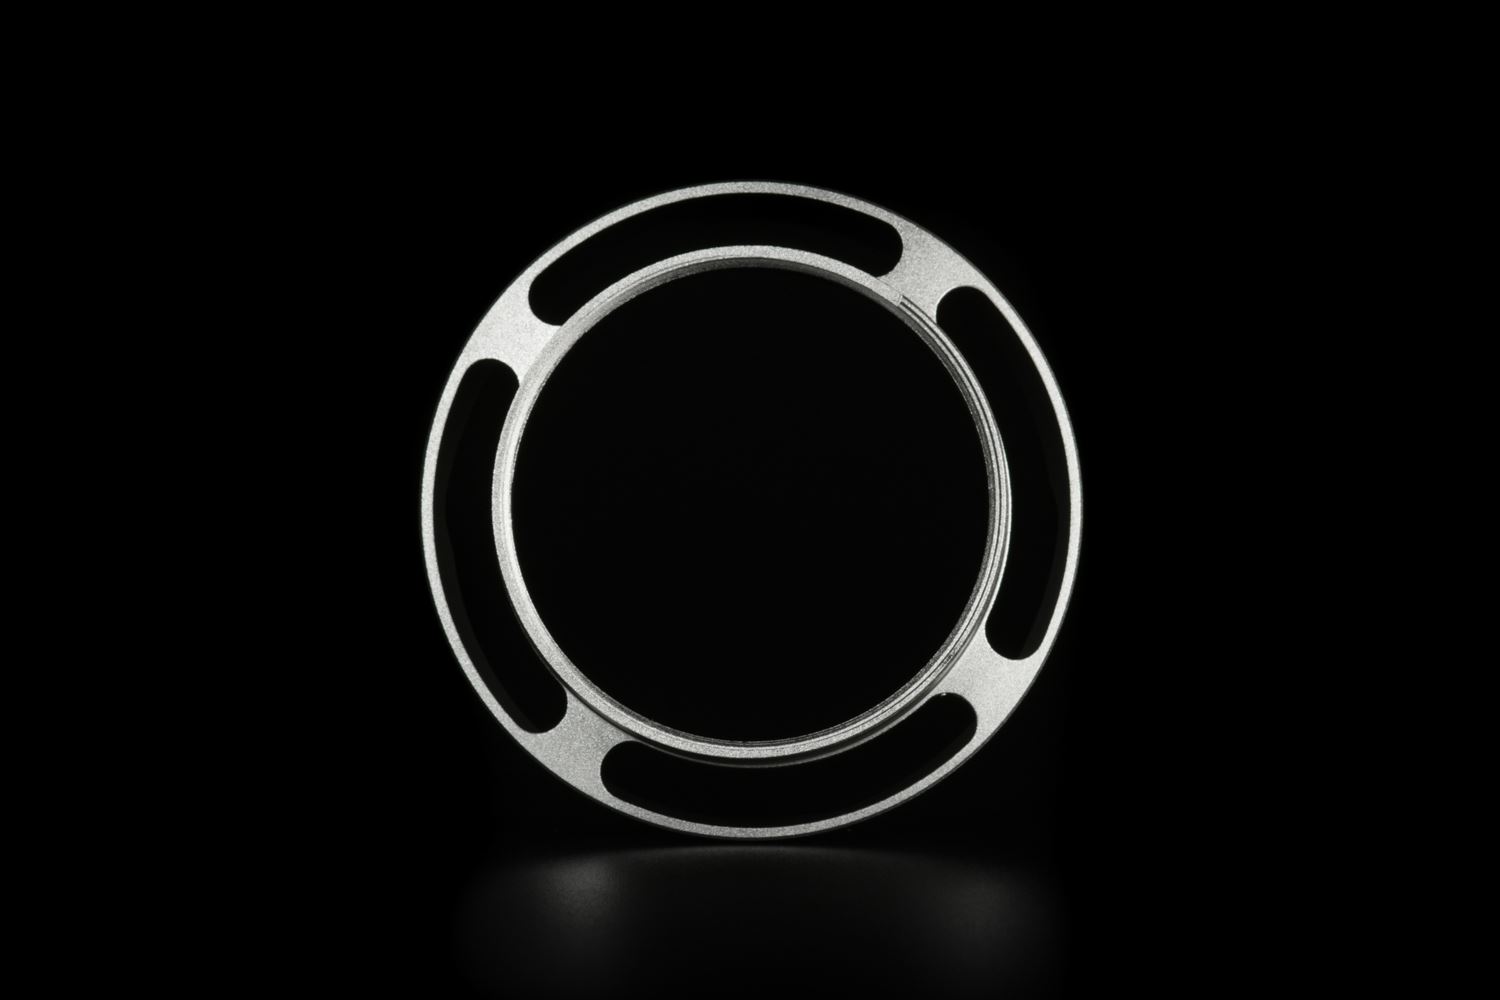 Picture of Silver Ventilated Lens Hood made for Leica E46 lenses